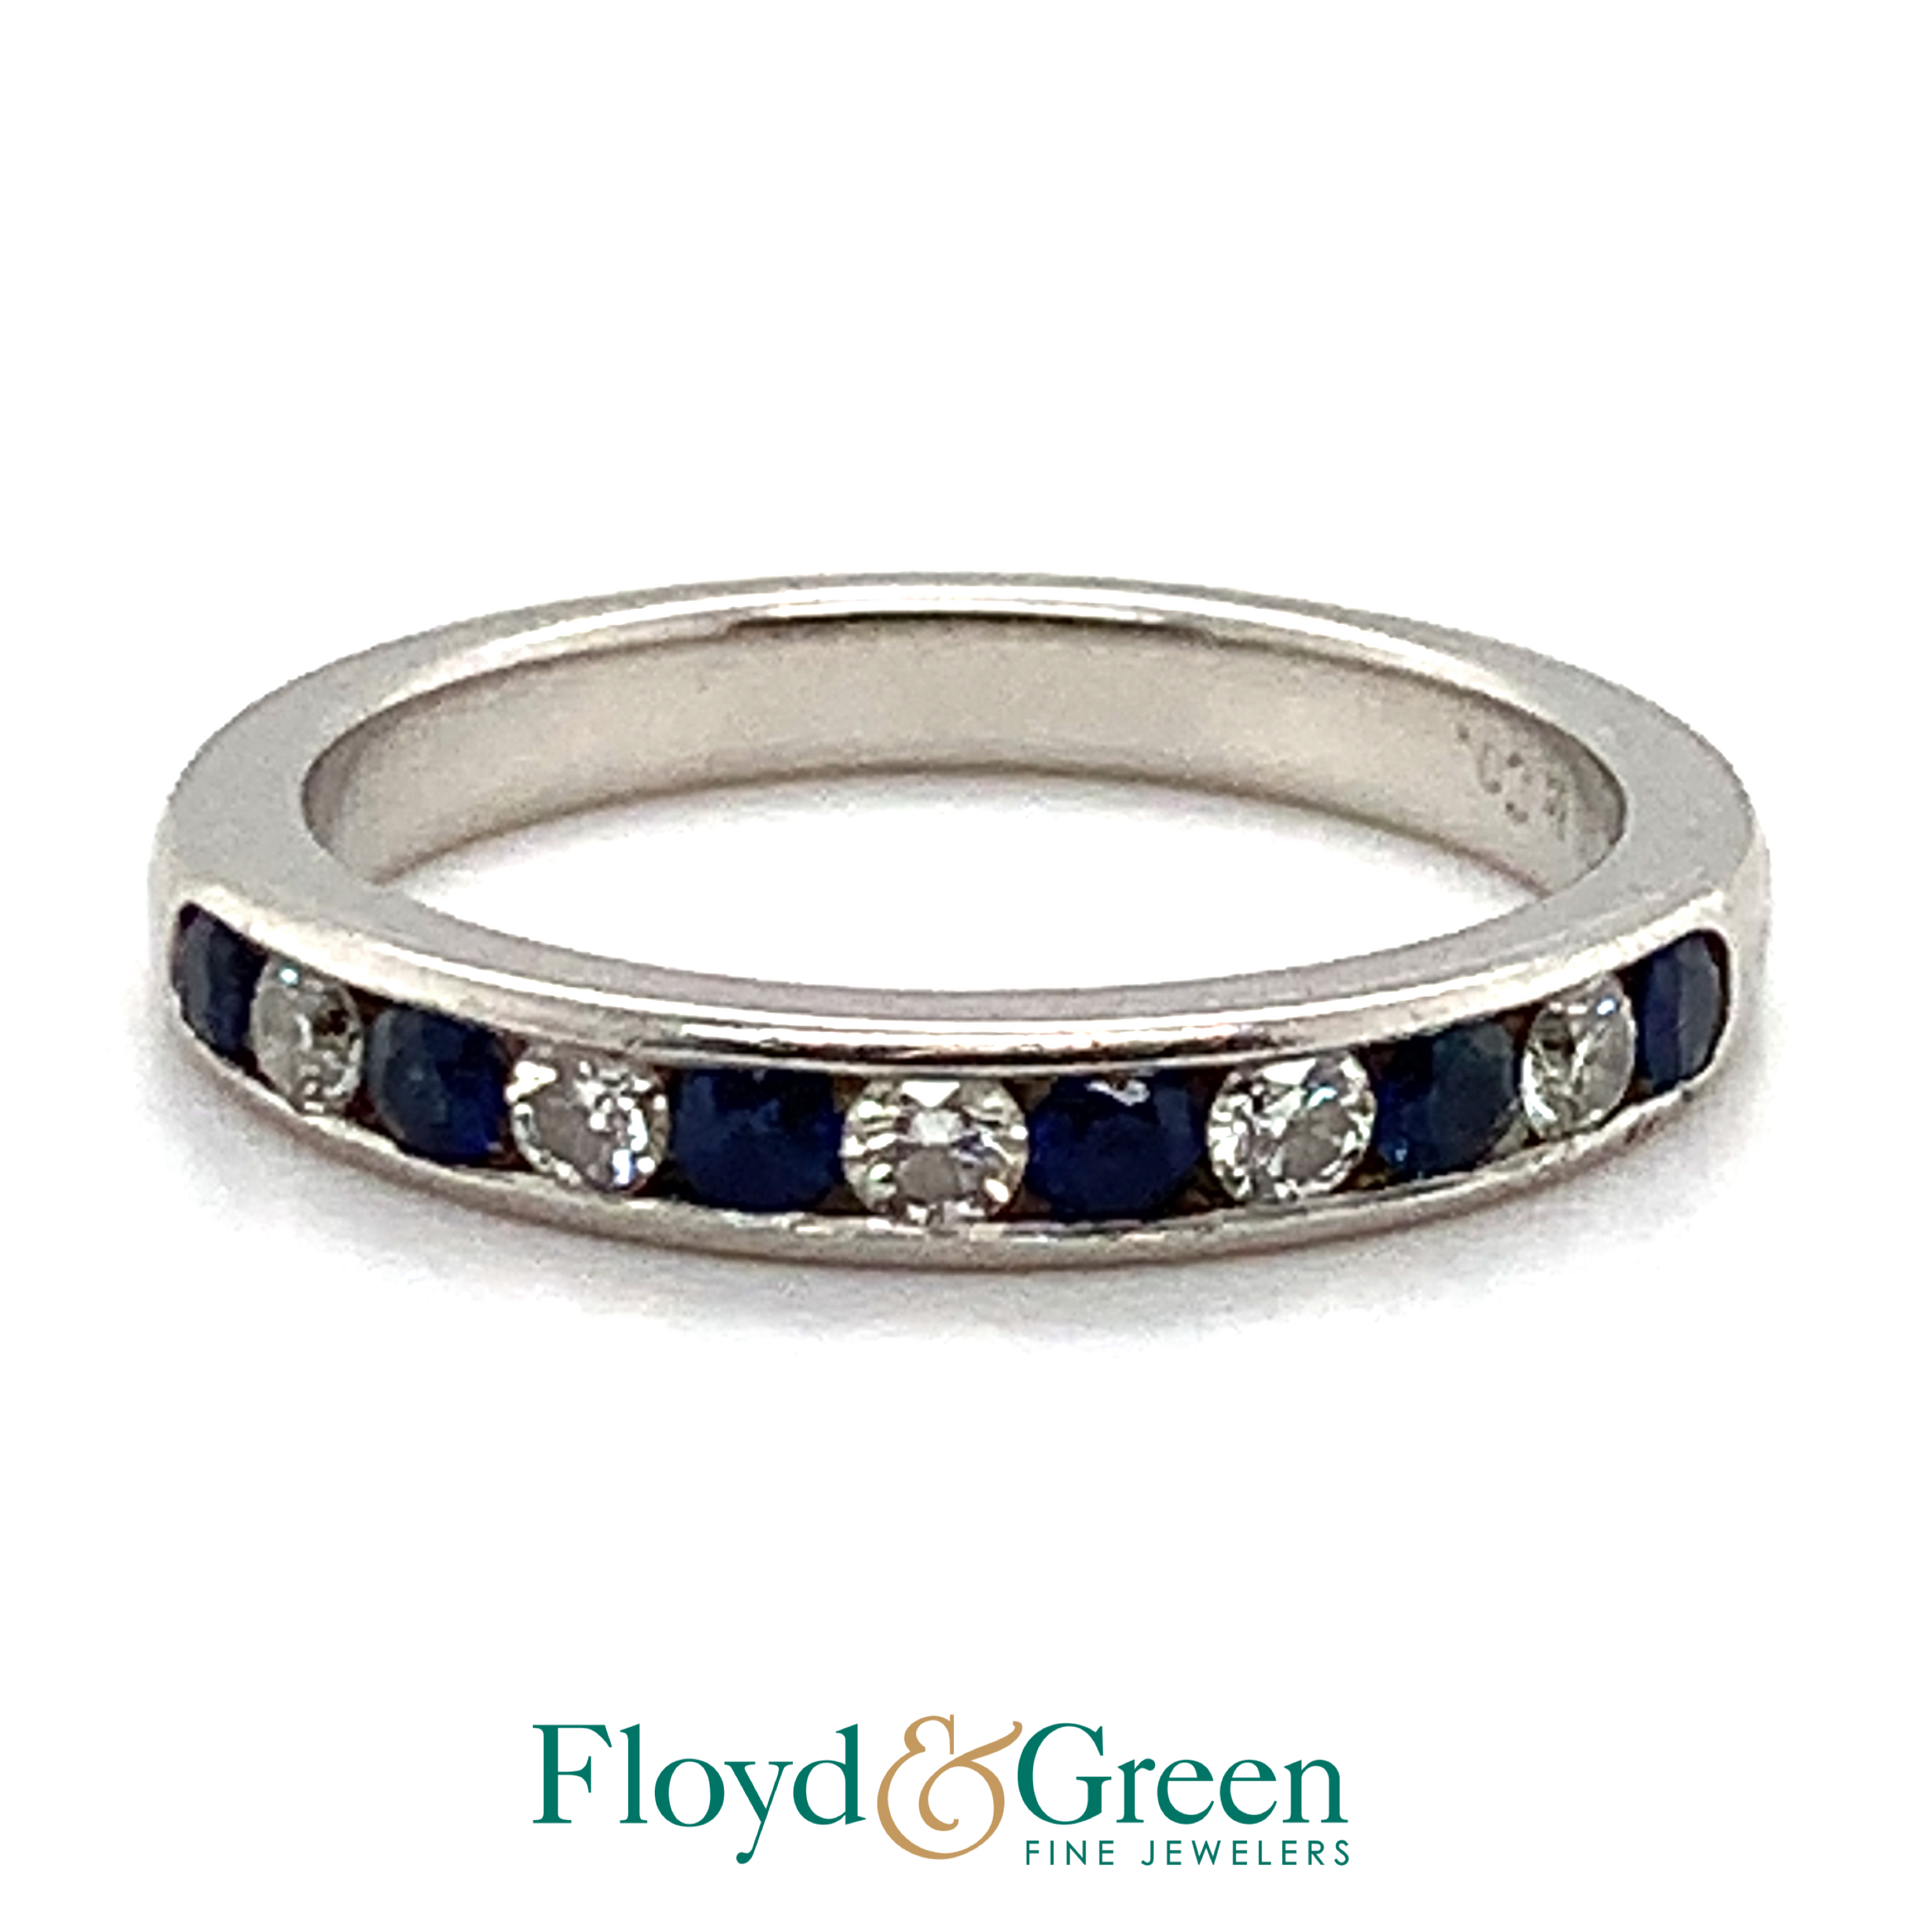 Tiffany and Co. Platinum Ring with Diamonds and Sapphires